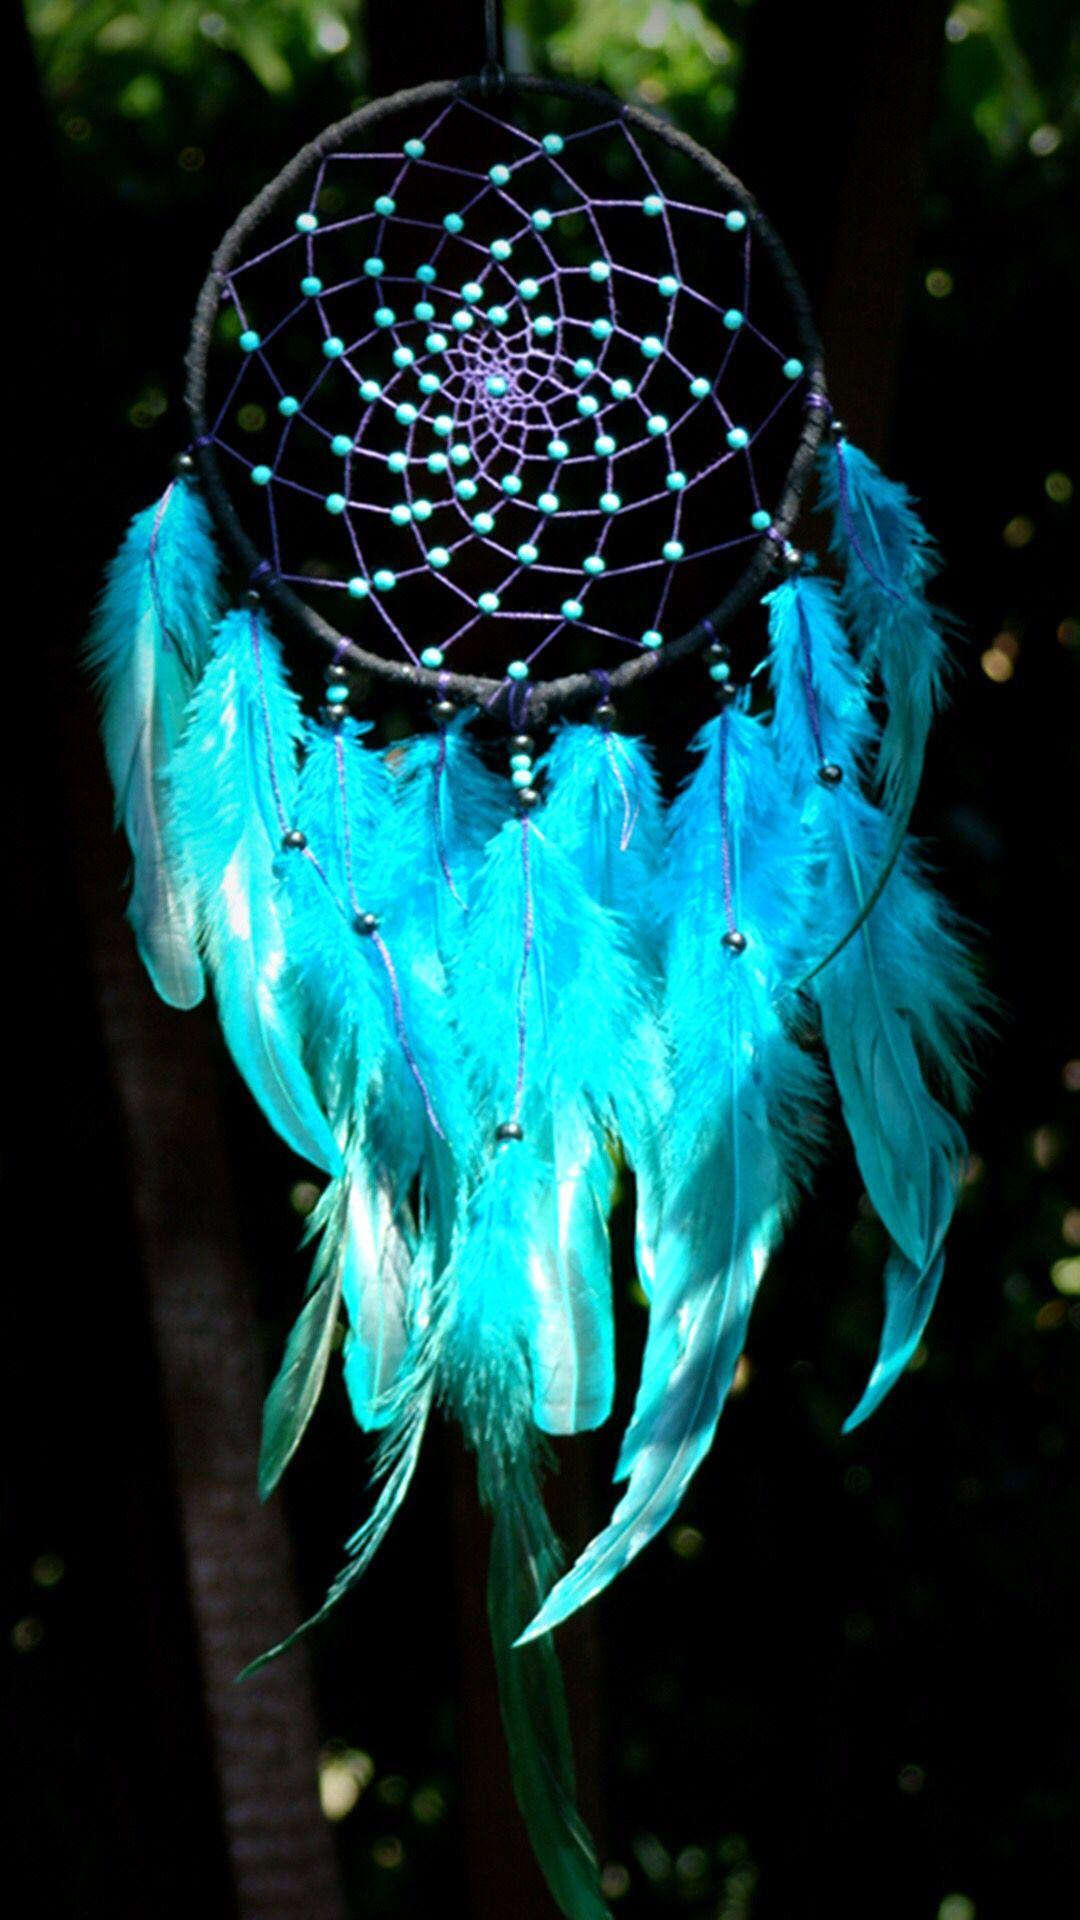 The light and dark blue of the dreamcatcher makes it look majestic